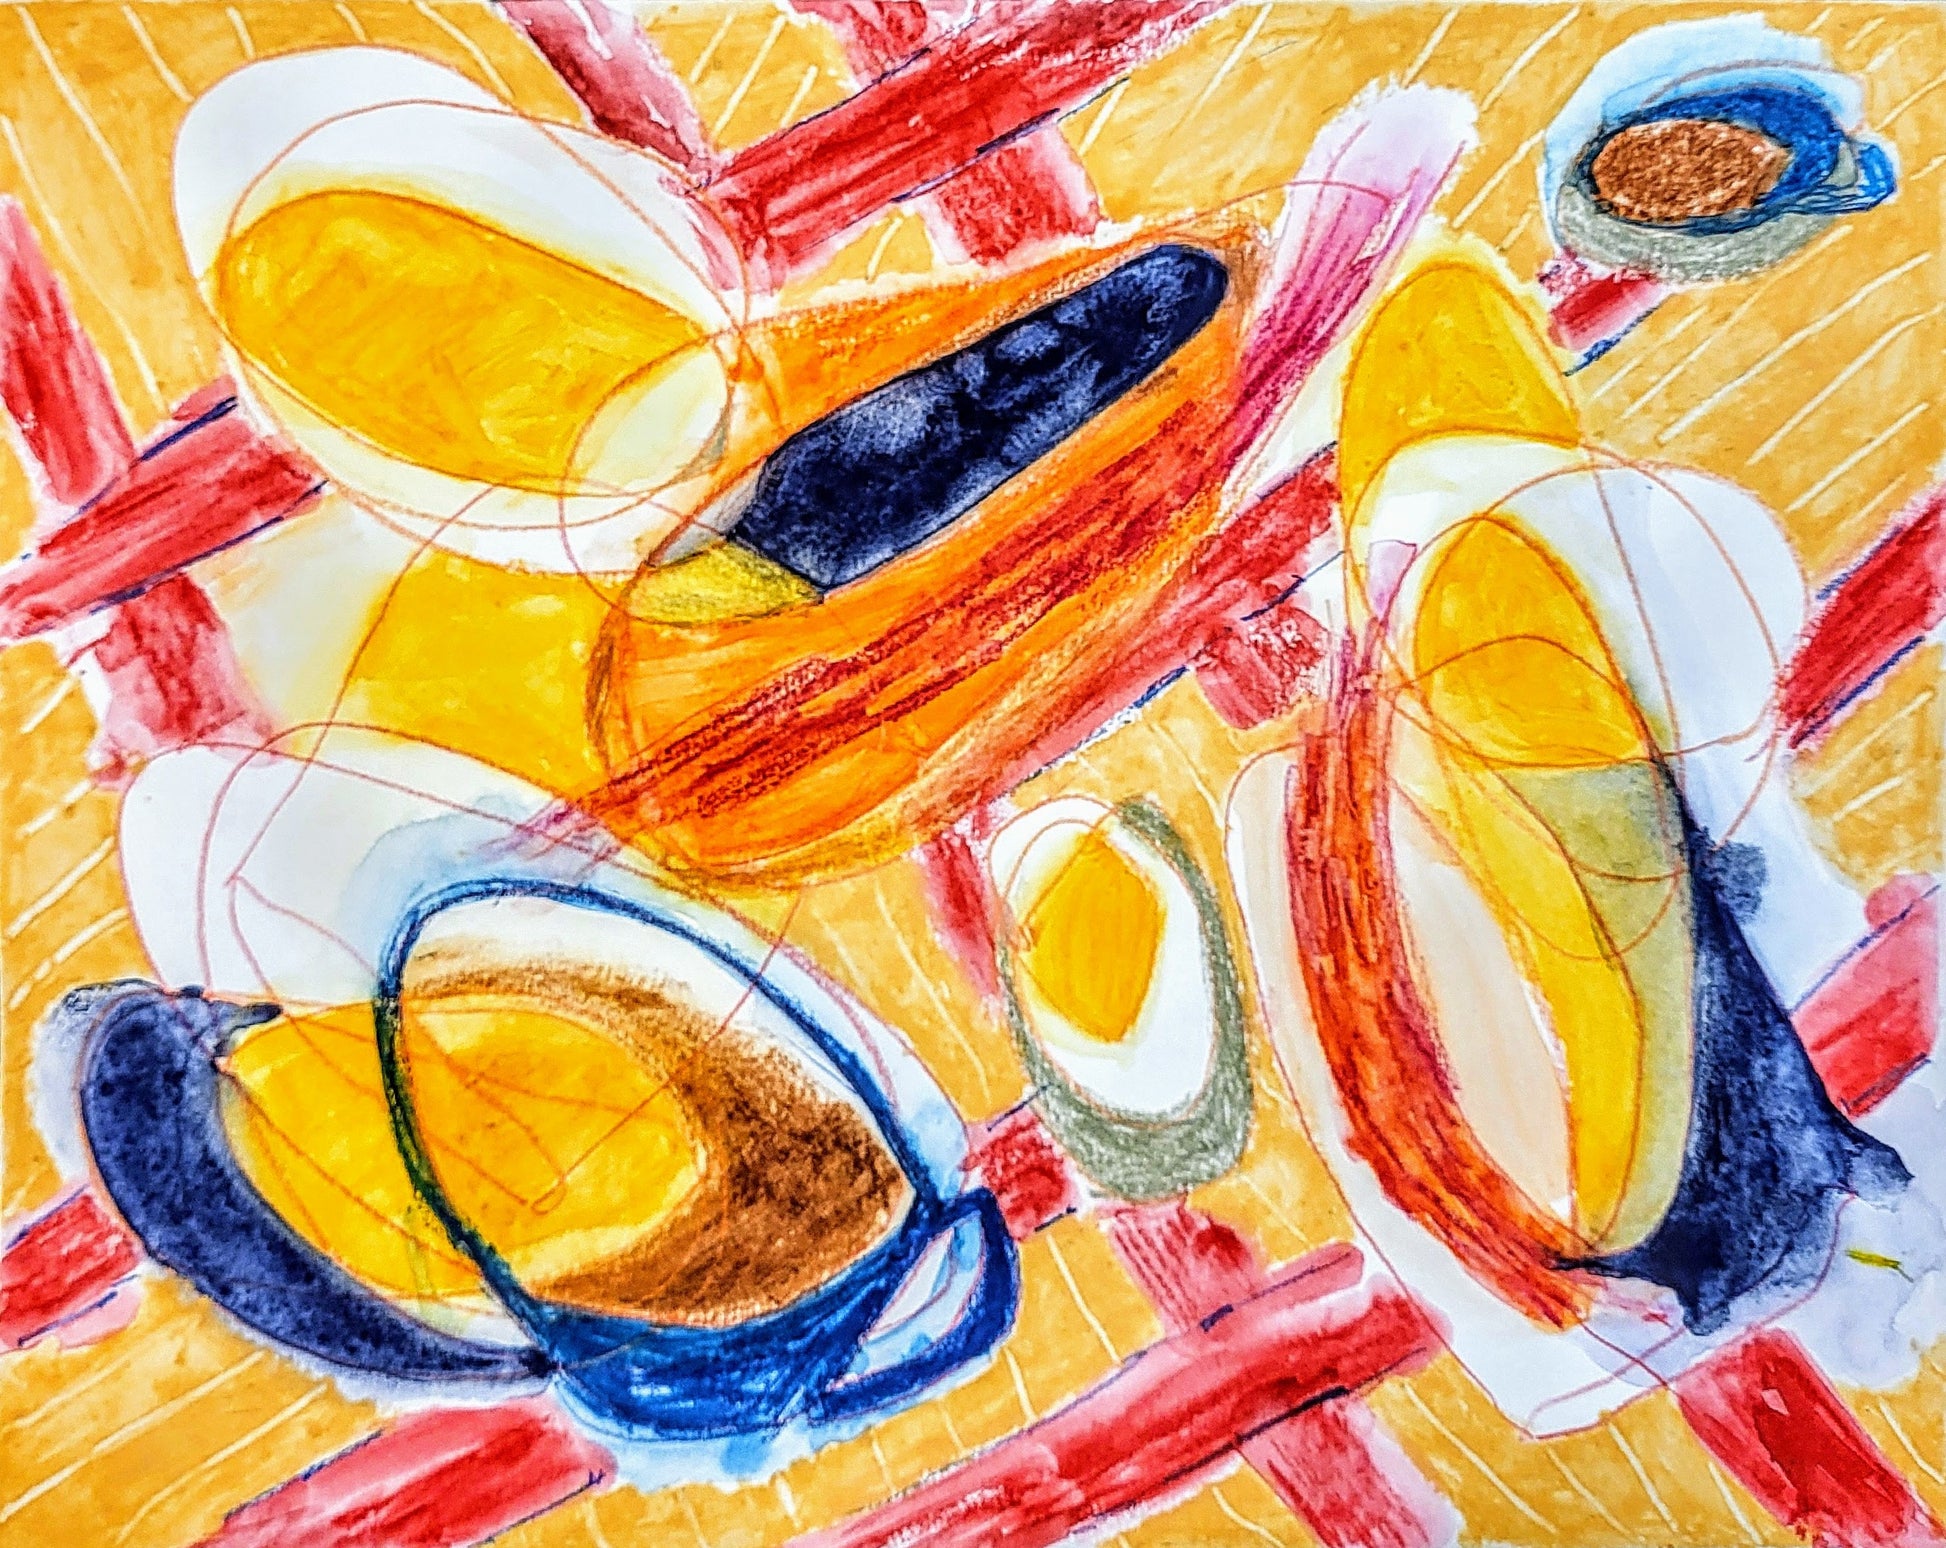 Mixed media abstract painting reminds you of eggs and bacon and coffee and all the breakfast things.